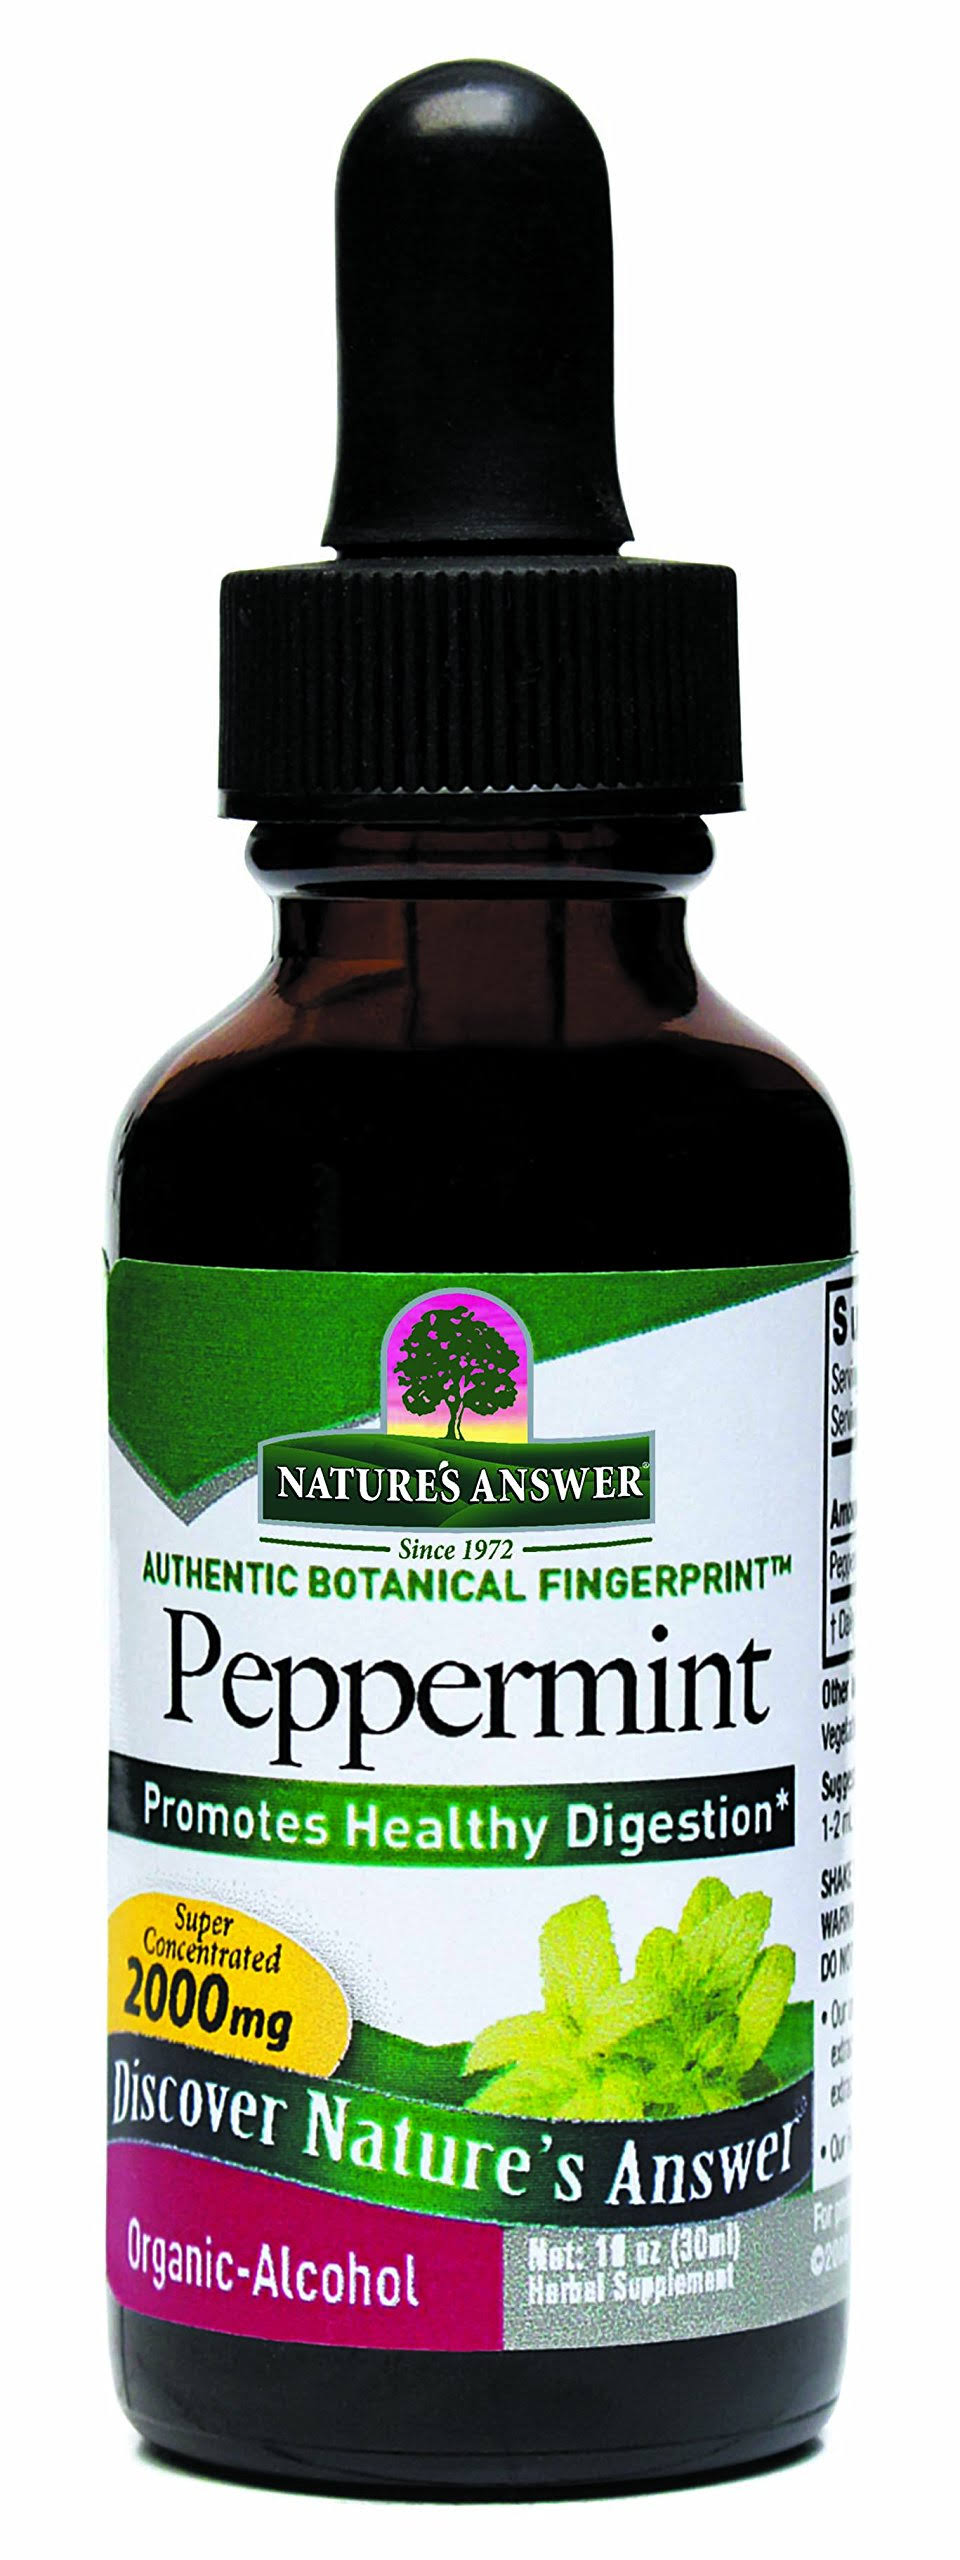 Nature's Answer Peppermint Herb - 1oz